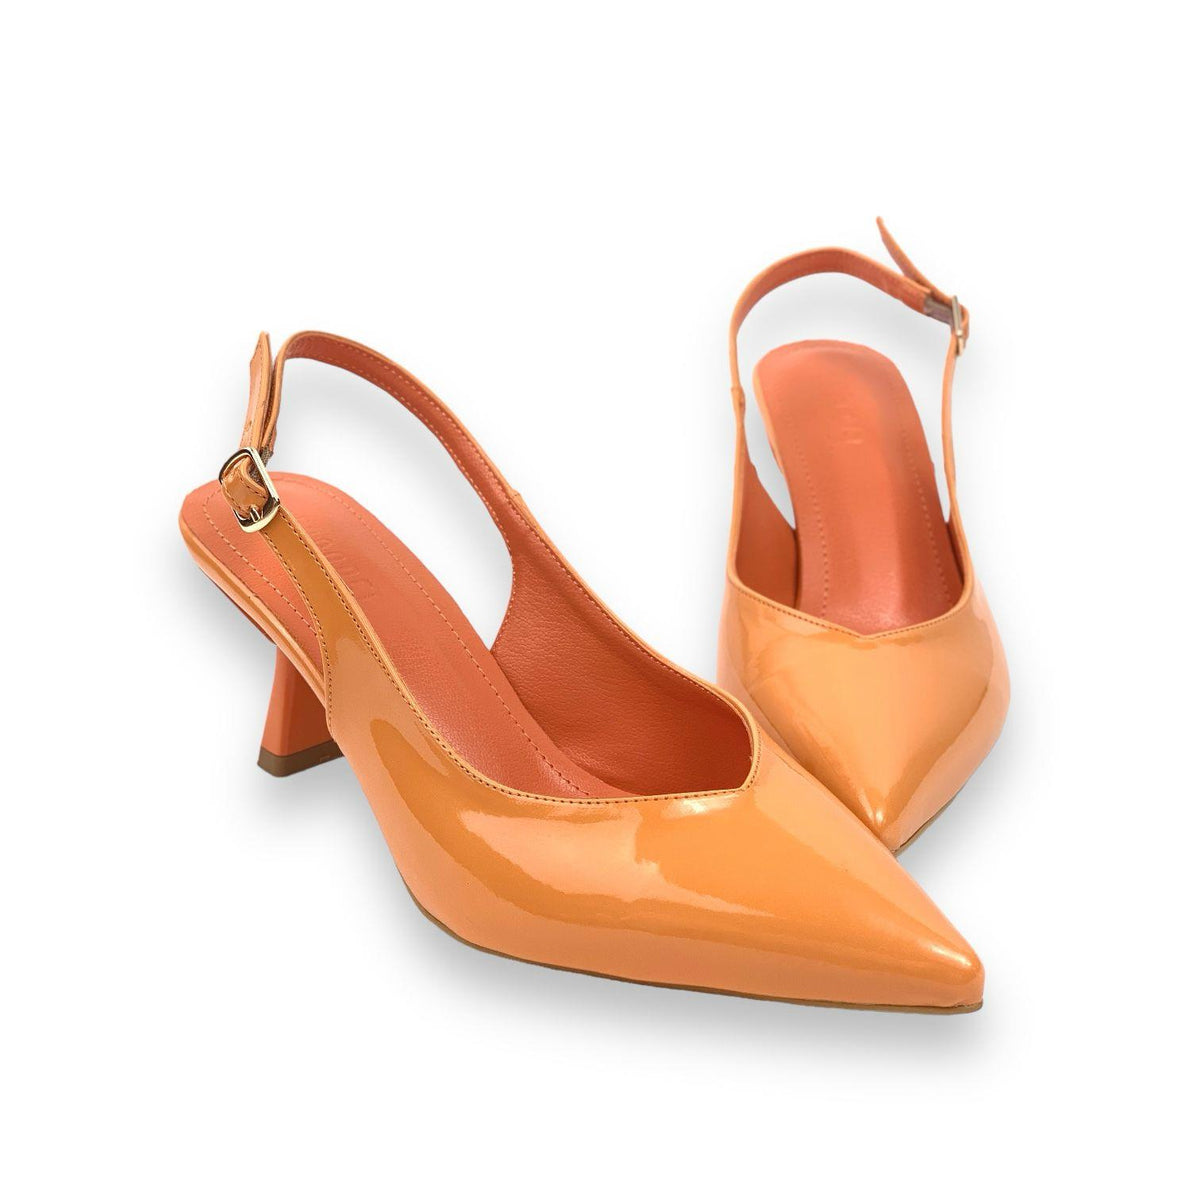 Women's Pasg Orange Patent Leather Pointed Toe Heeled Sandals 6 Cm - STREETMODE ™